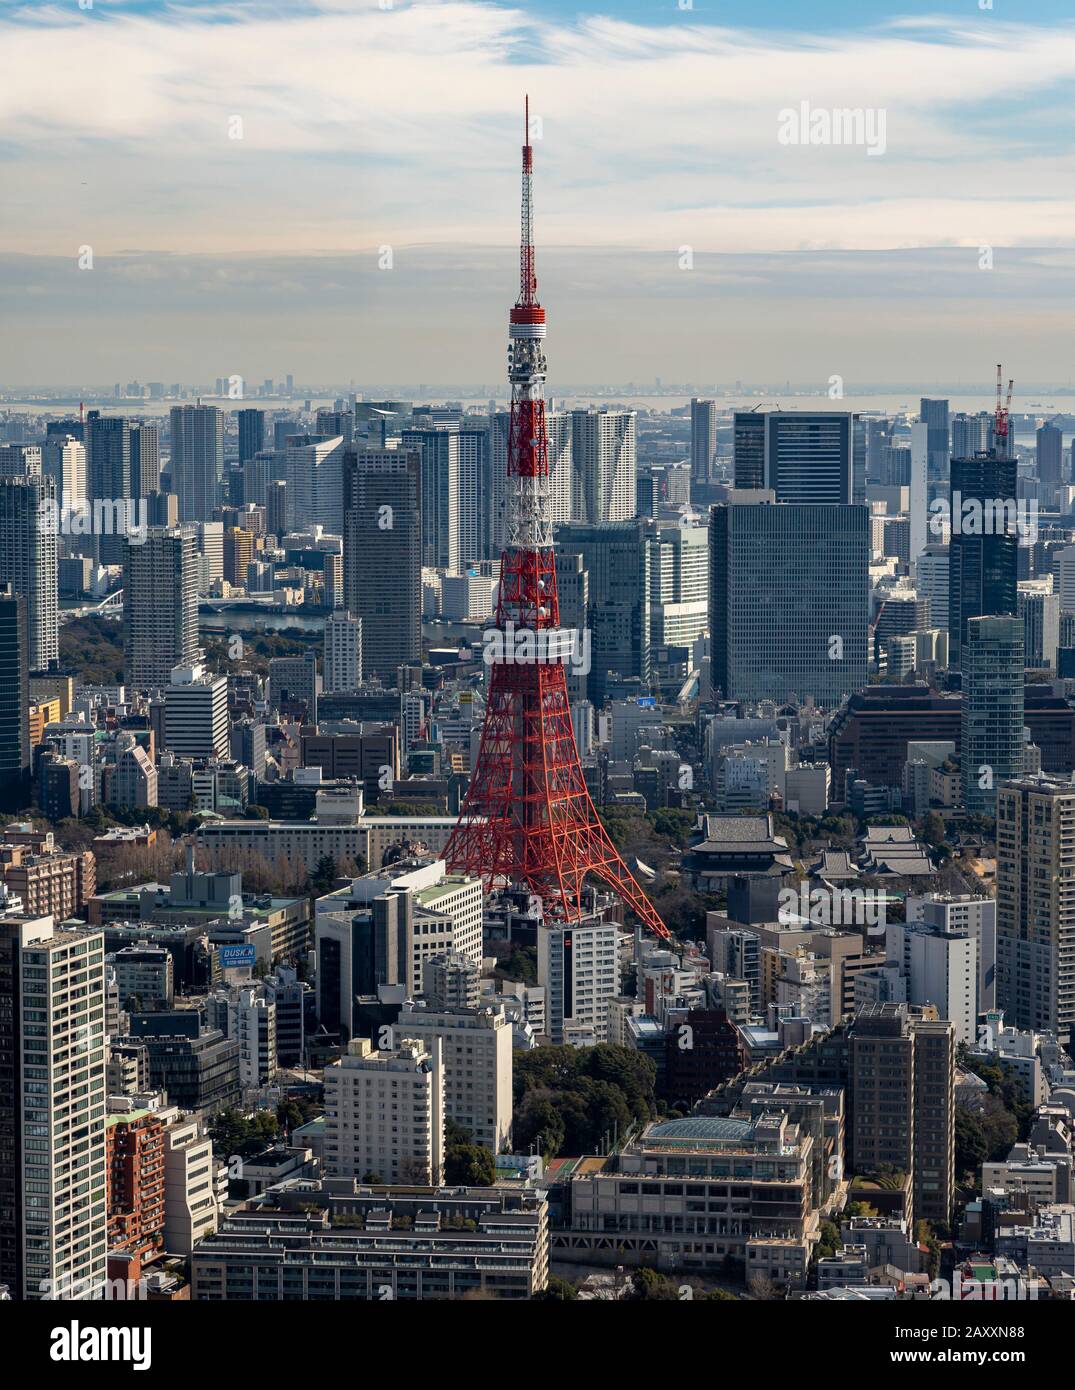 Tokyo Tower Seen From Roppongi Hills Mori Tower In Japan Stock Photo Alamy